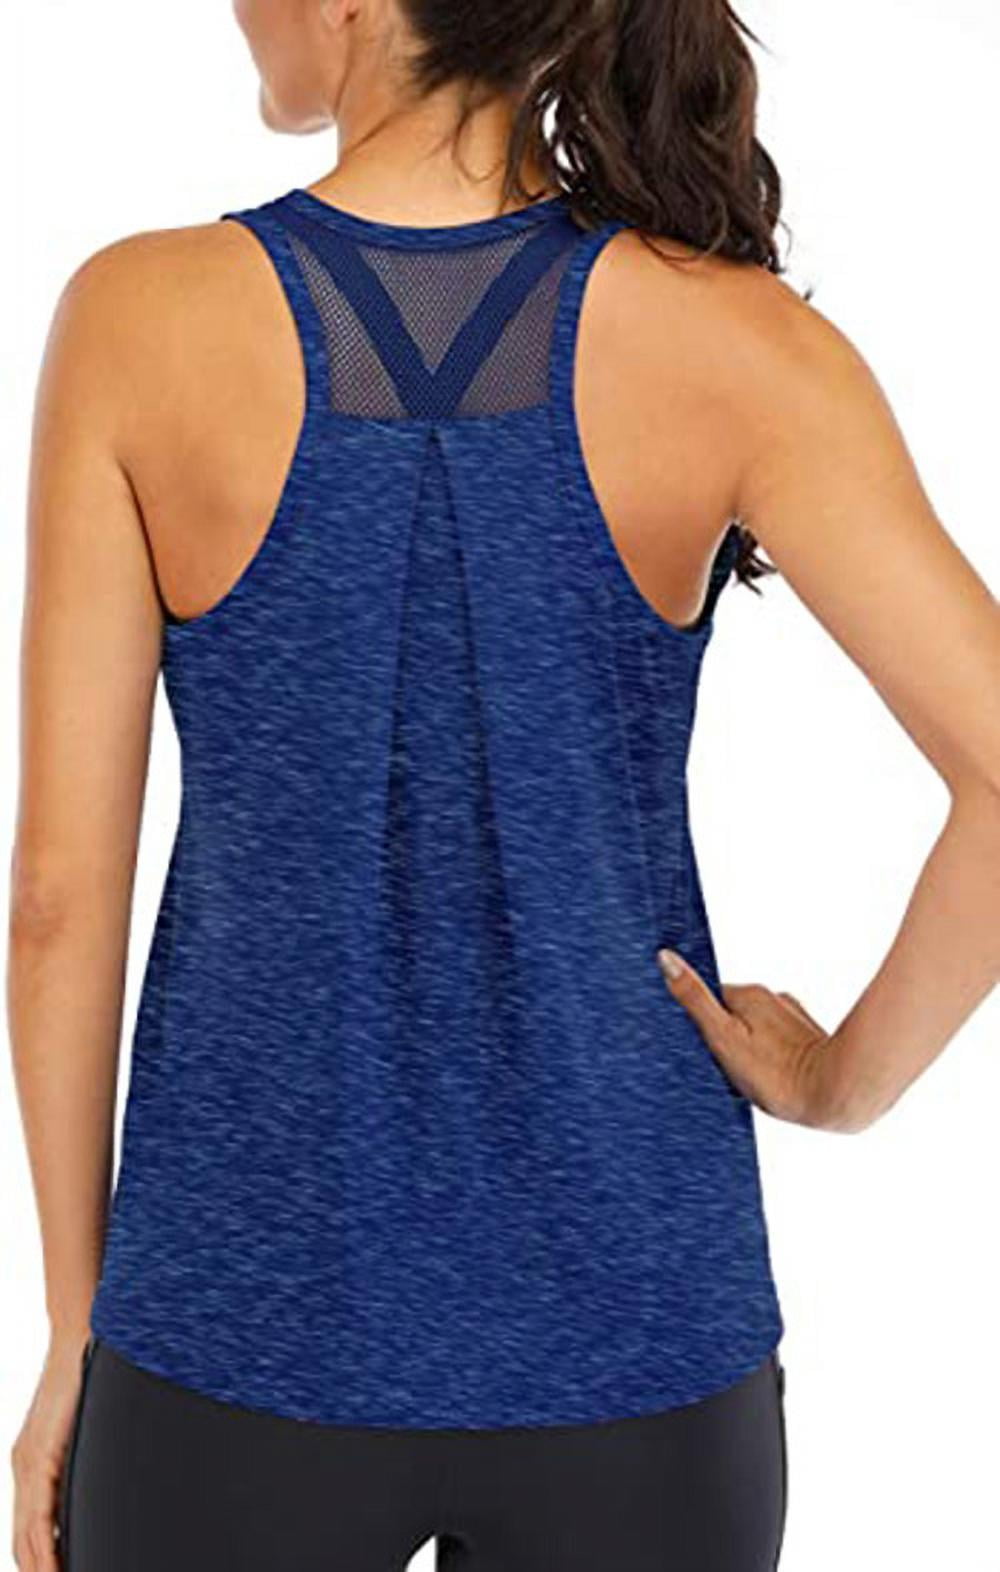 Women's Loose Fit Activewear Workout Gym Tank Tops Drop Armhole Athletic  Sports Running Yoga Tops Shirts L(8/10) 